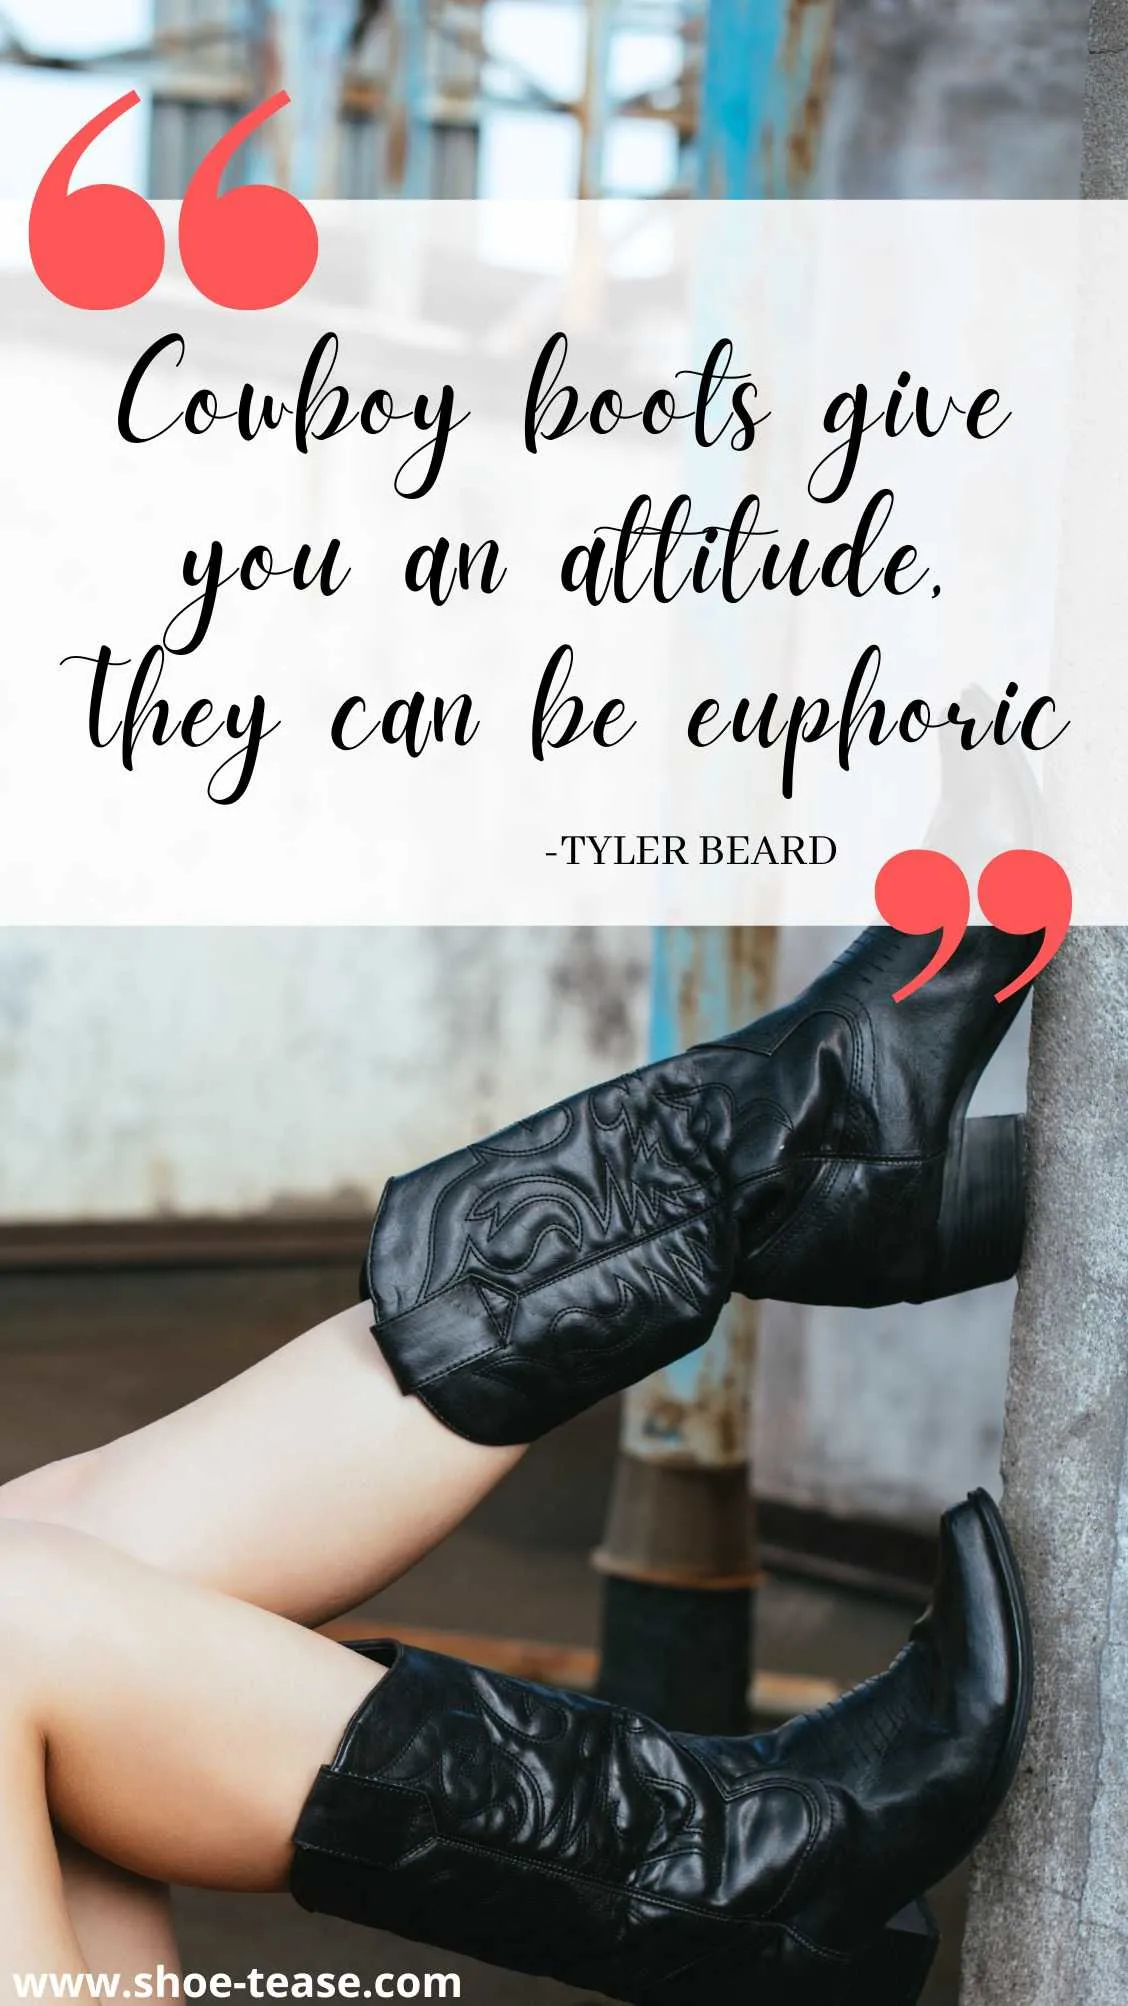 Quote reading Cowboy boots give you an attitude, they can be euphoric by Tyler Beard over image of woman's legs kicking up on a wall.